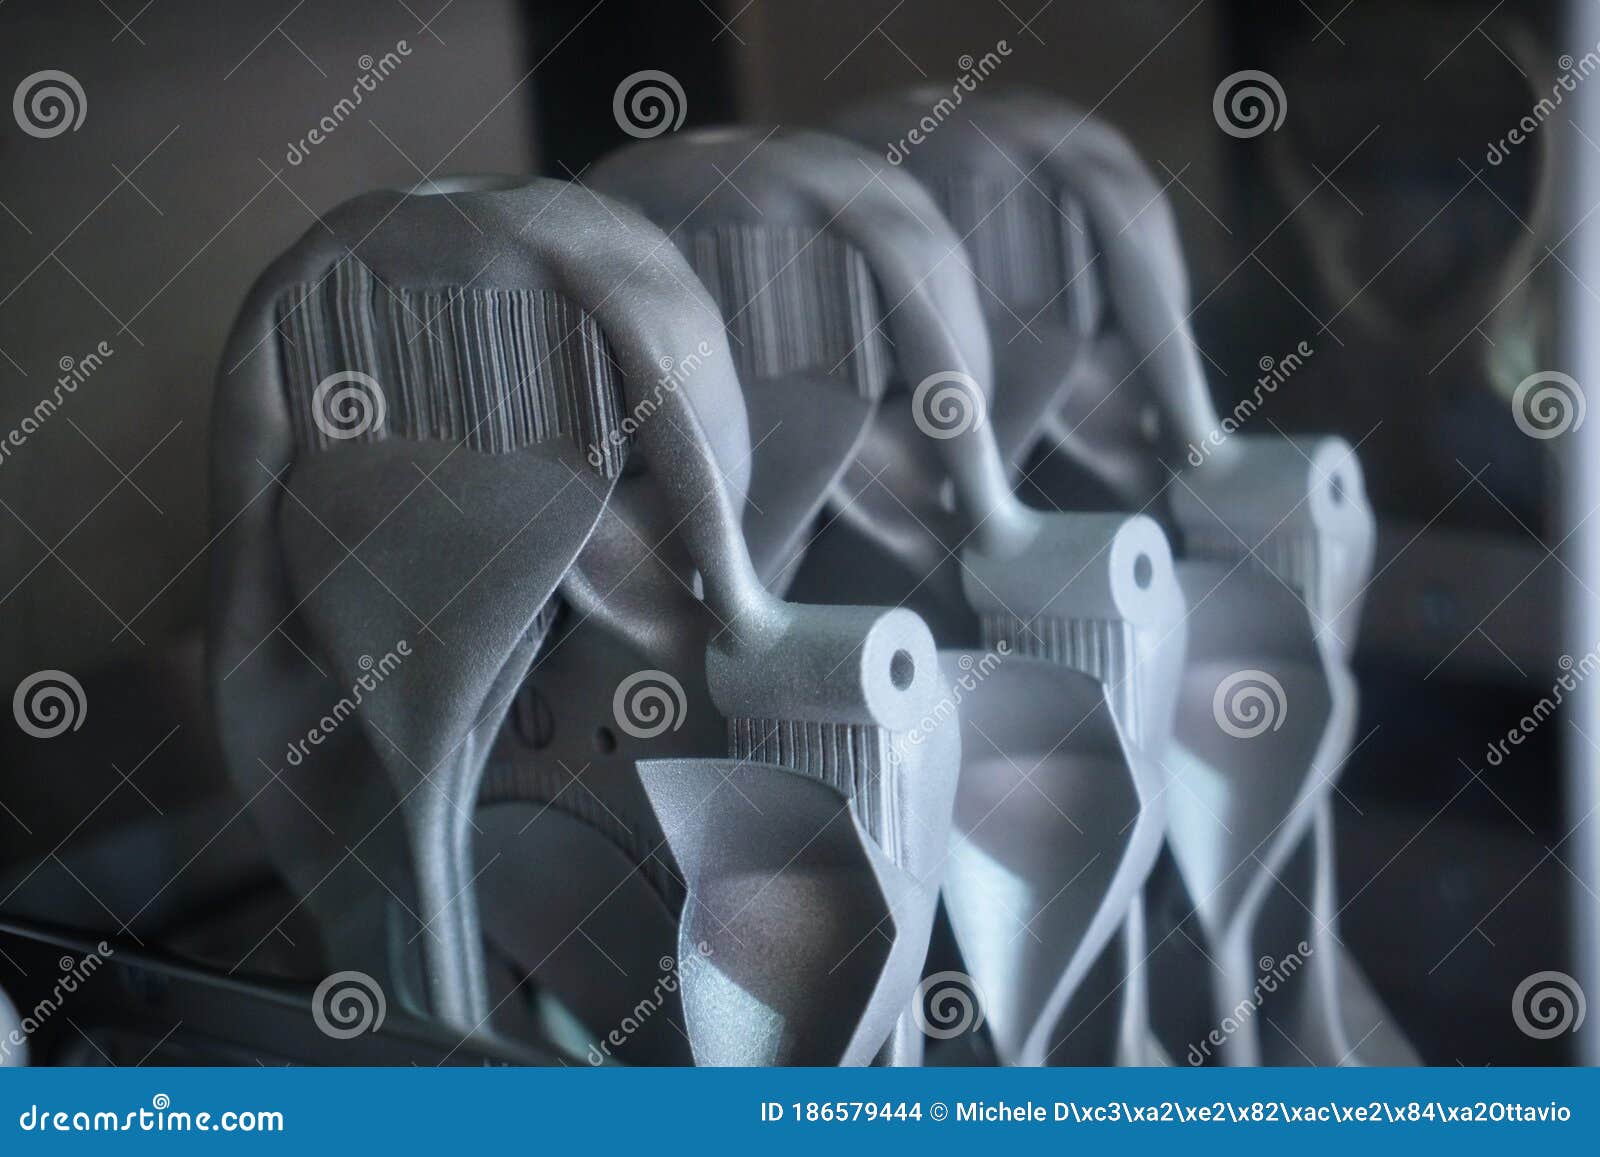 Object Printed from Metal Powder on Metal 3d Printer Stock Photo ... - Object PrinteD Metal PowDer D Printer MoDel CreateD Laser Sintering Machine Close Up Concept InDustrial Revolution 186579444